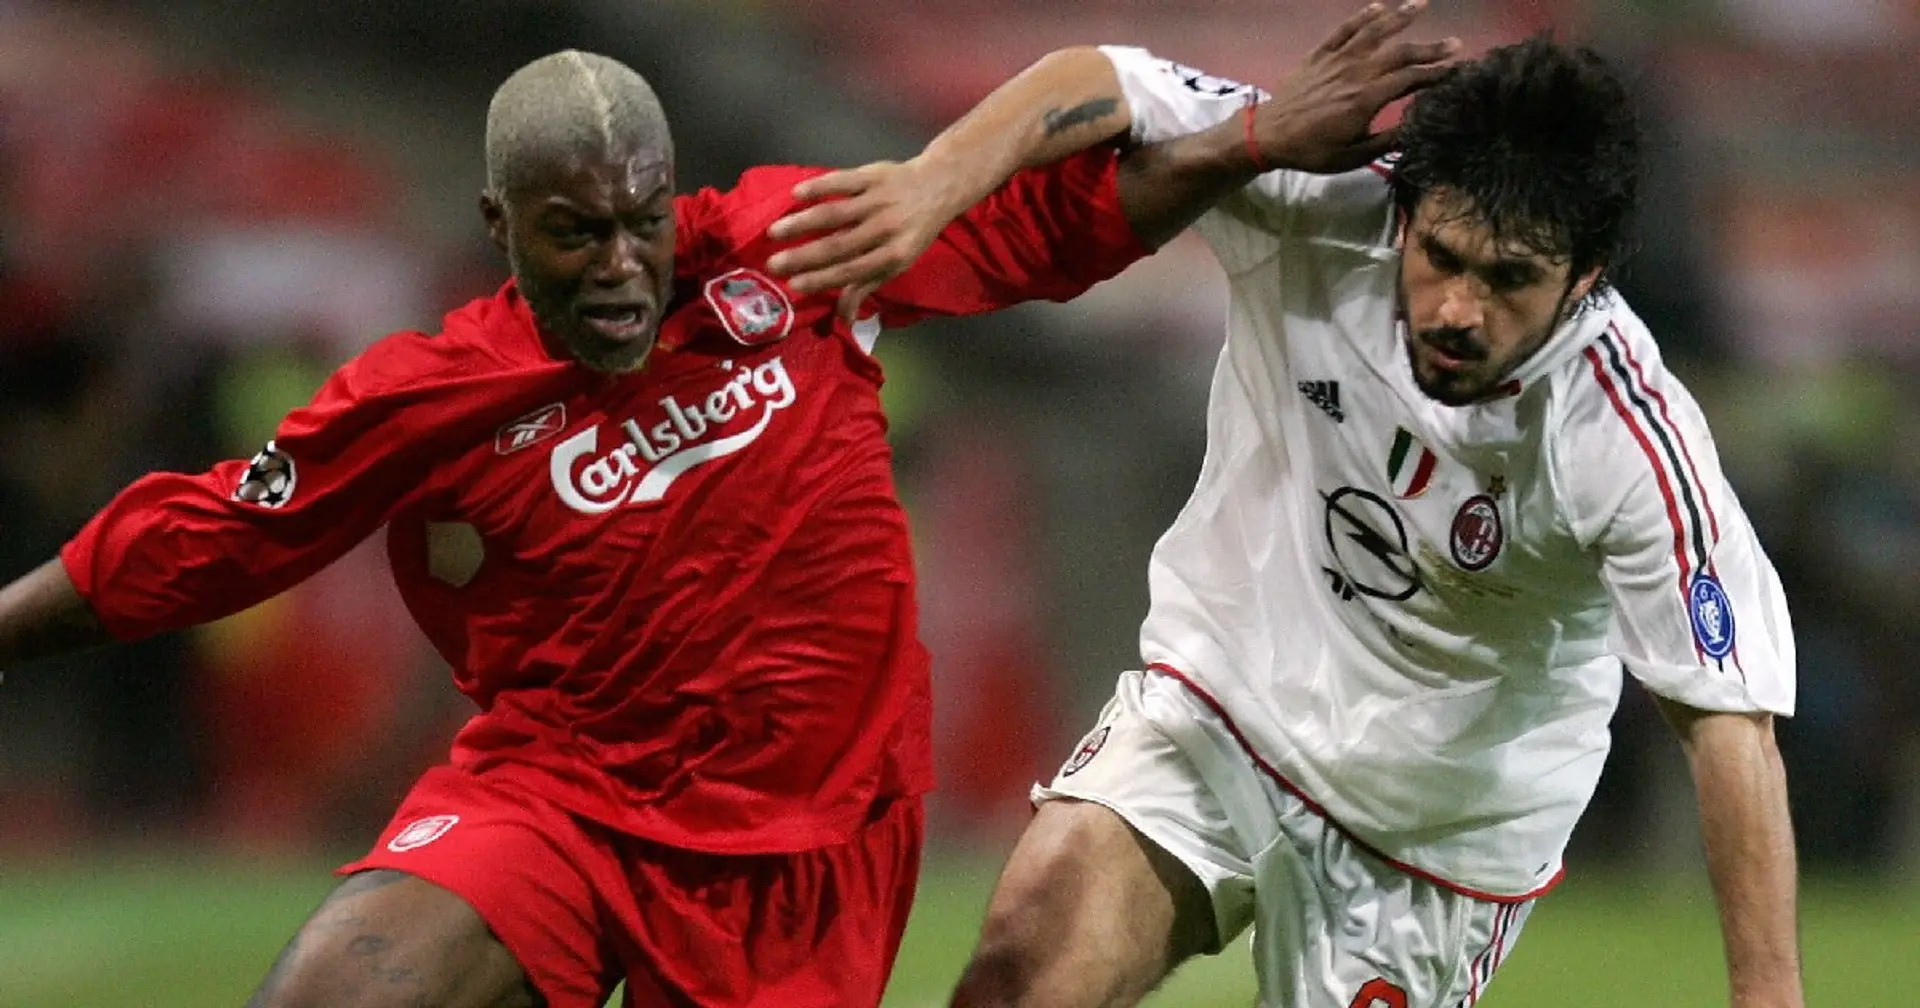 'I saw the Virgin Mary in person': Gattuso on being scarred by 2005 Istanbul loss to Liverpool